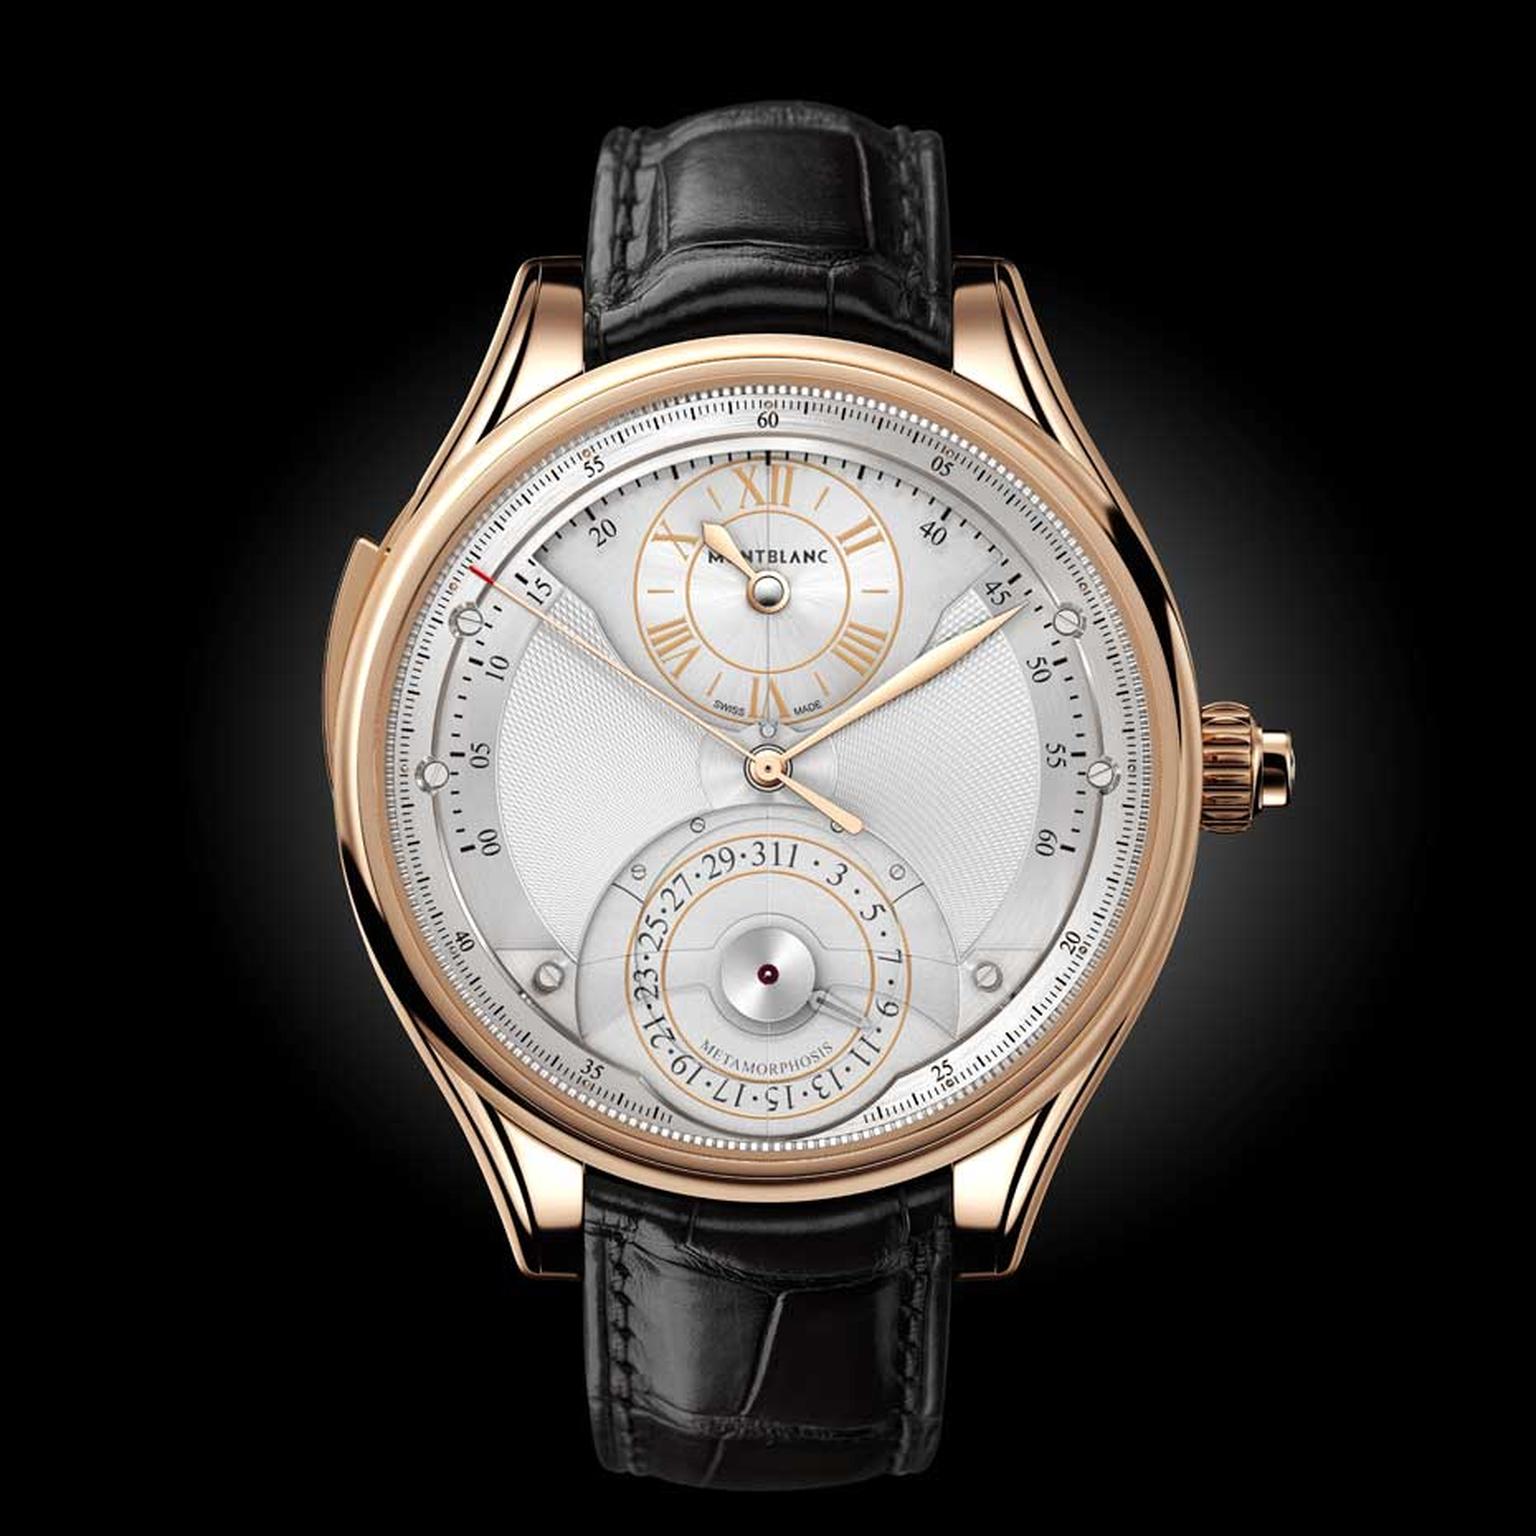 Montblanc Metamorphosis II watch appears with the classical hour, retrograde minute and date dial, and is presented in a 45mm rose gold case. If you look closely at the hours and seconds discs, you will notice a slight depression on the dial.